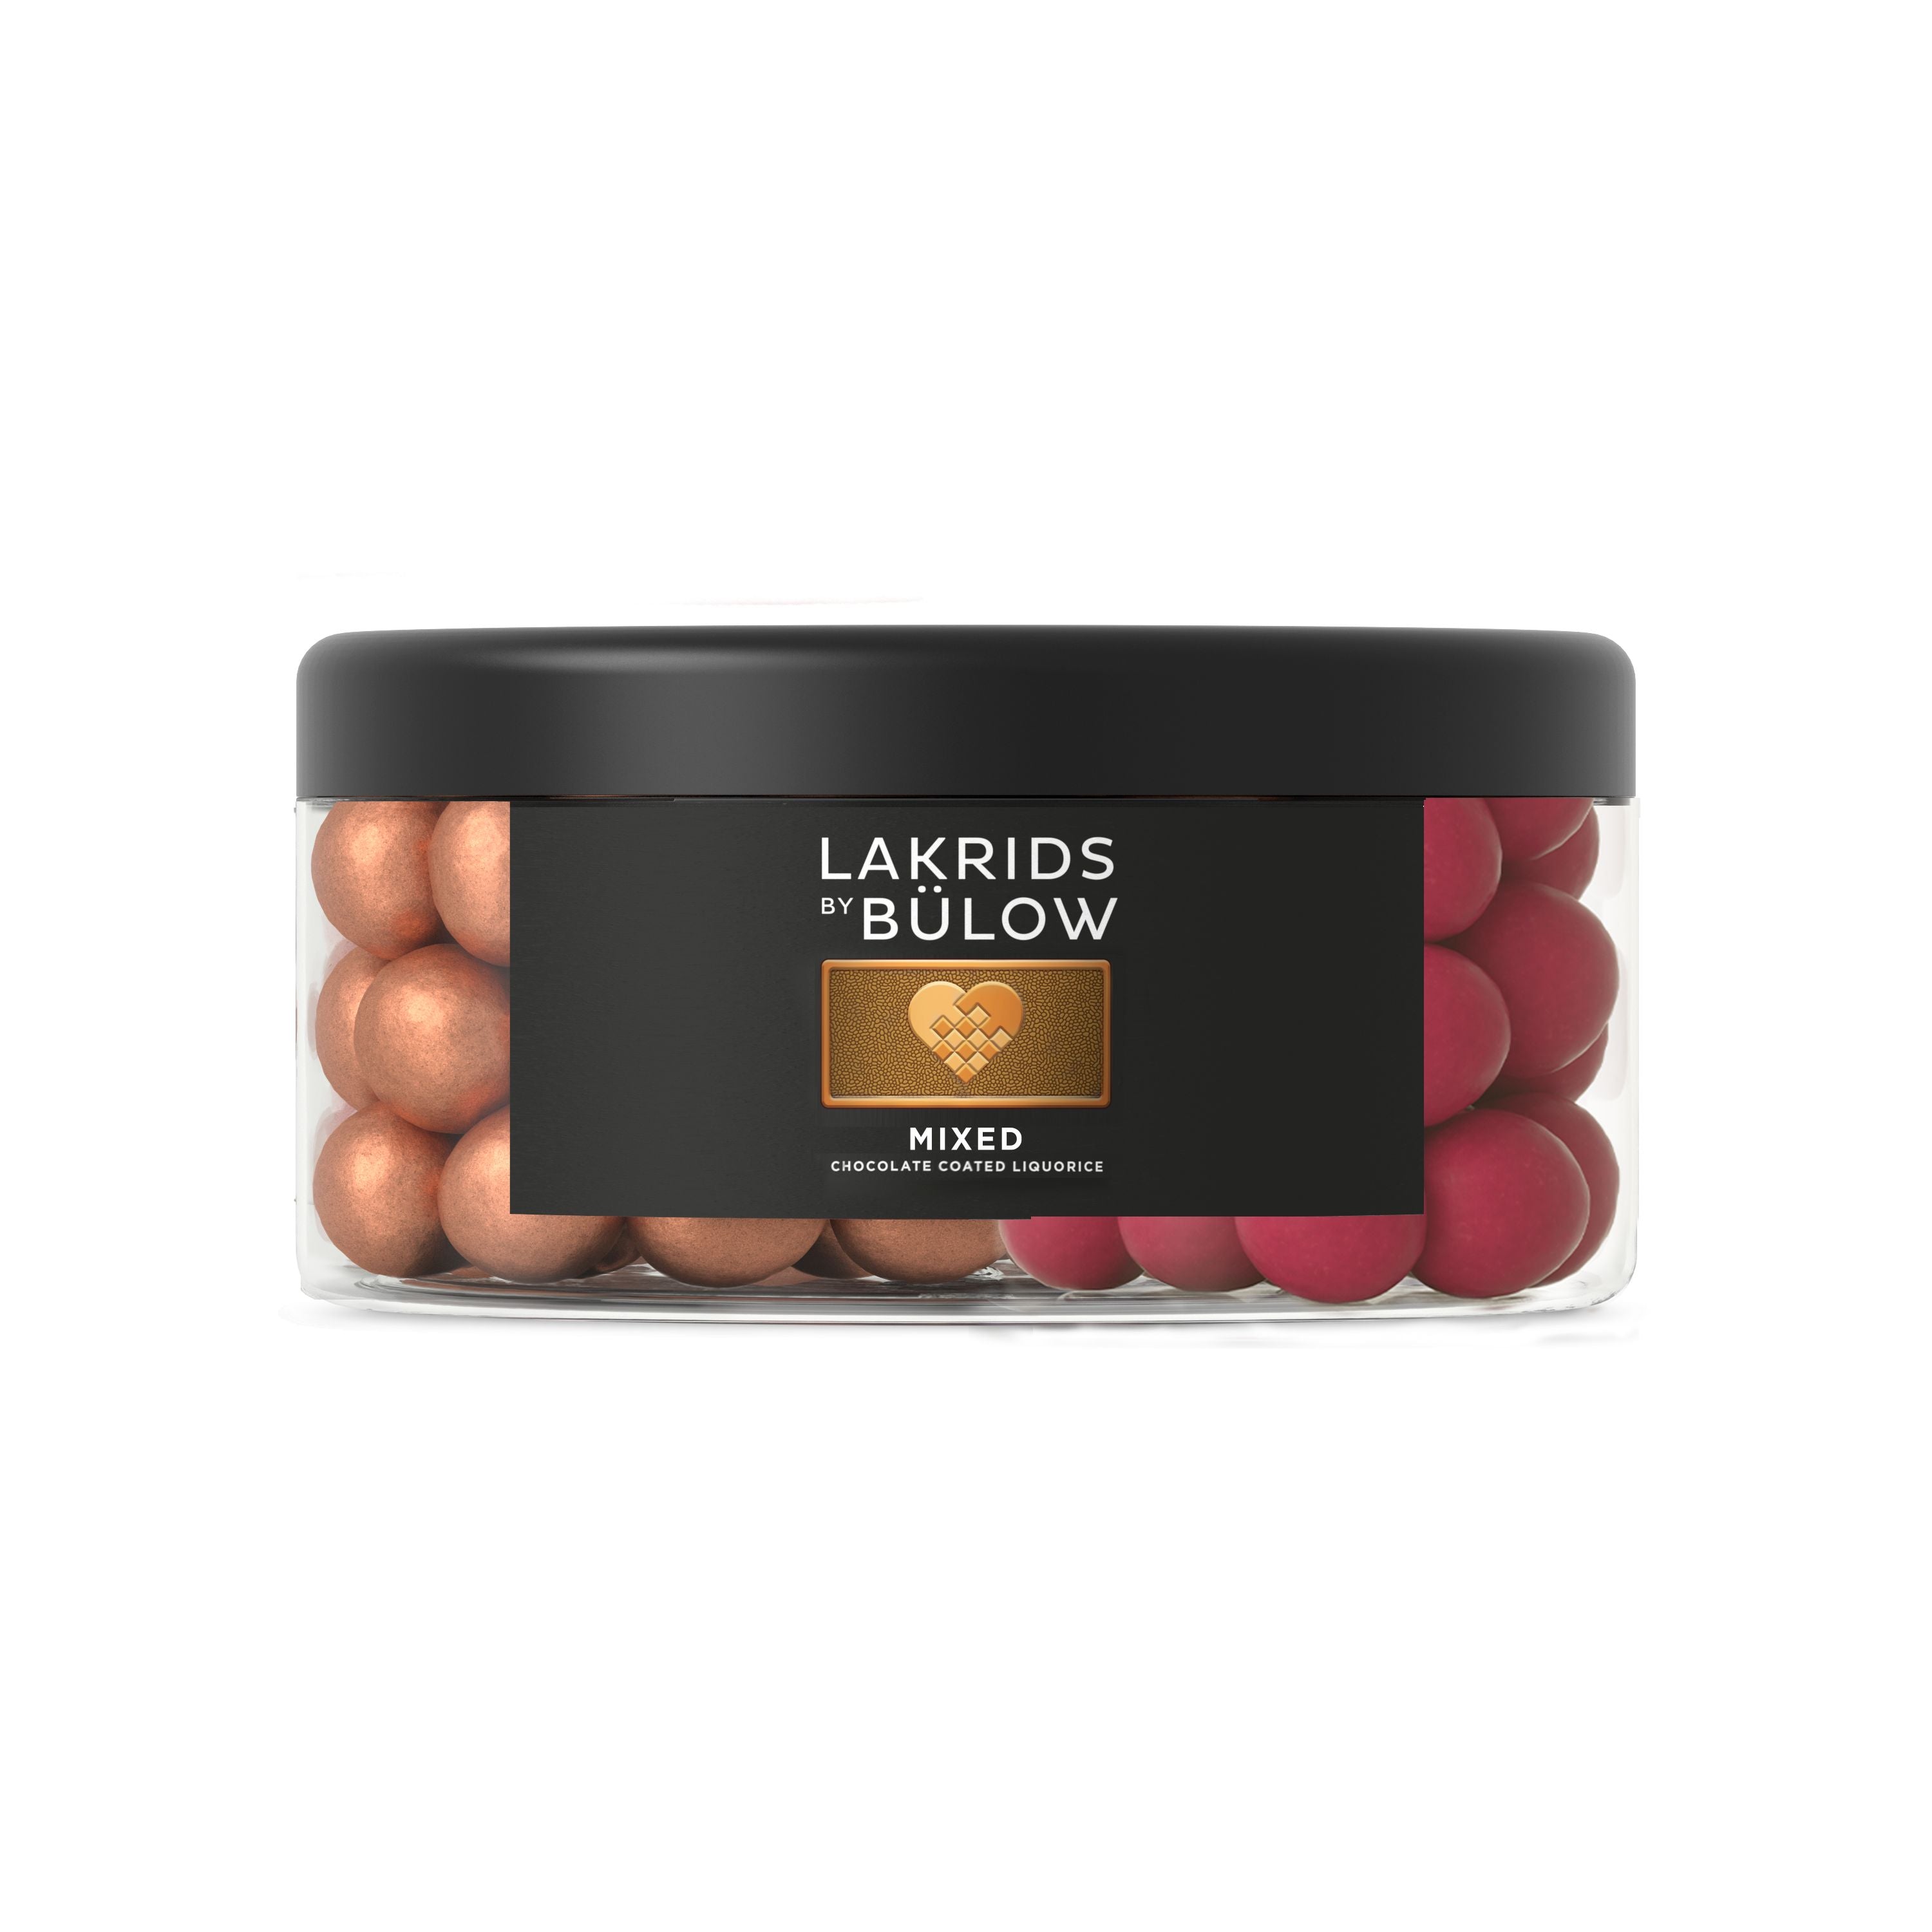 Lakrids af Bulow Mixed Classic/Raspberry, 550g